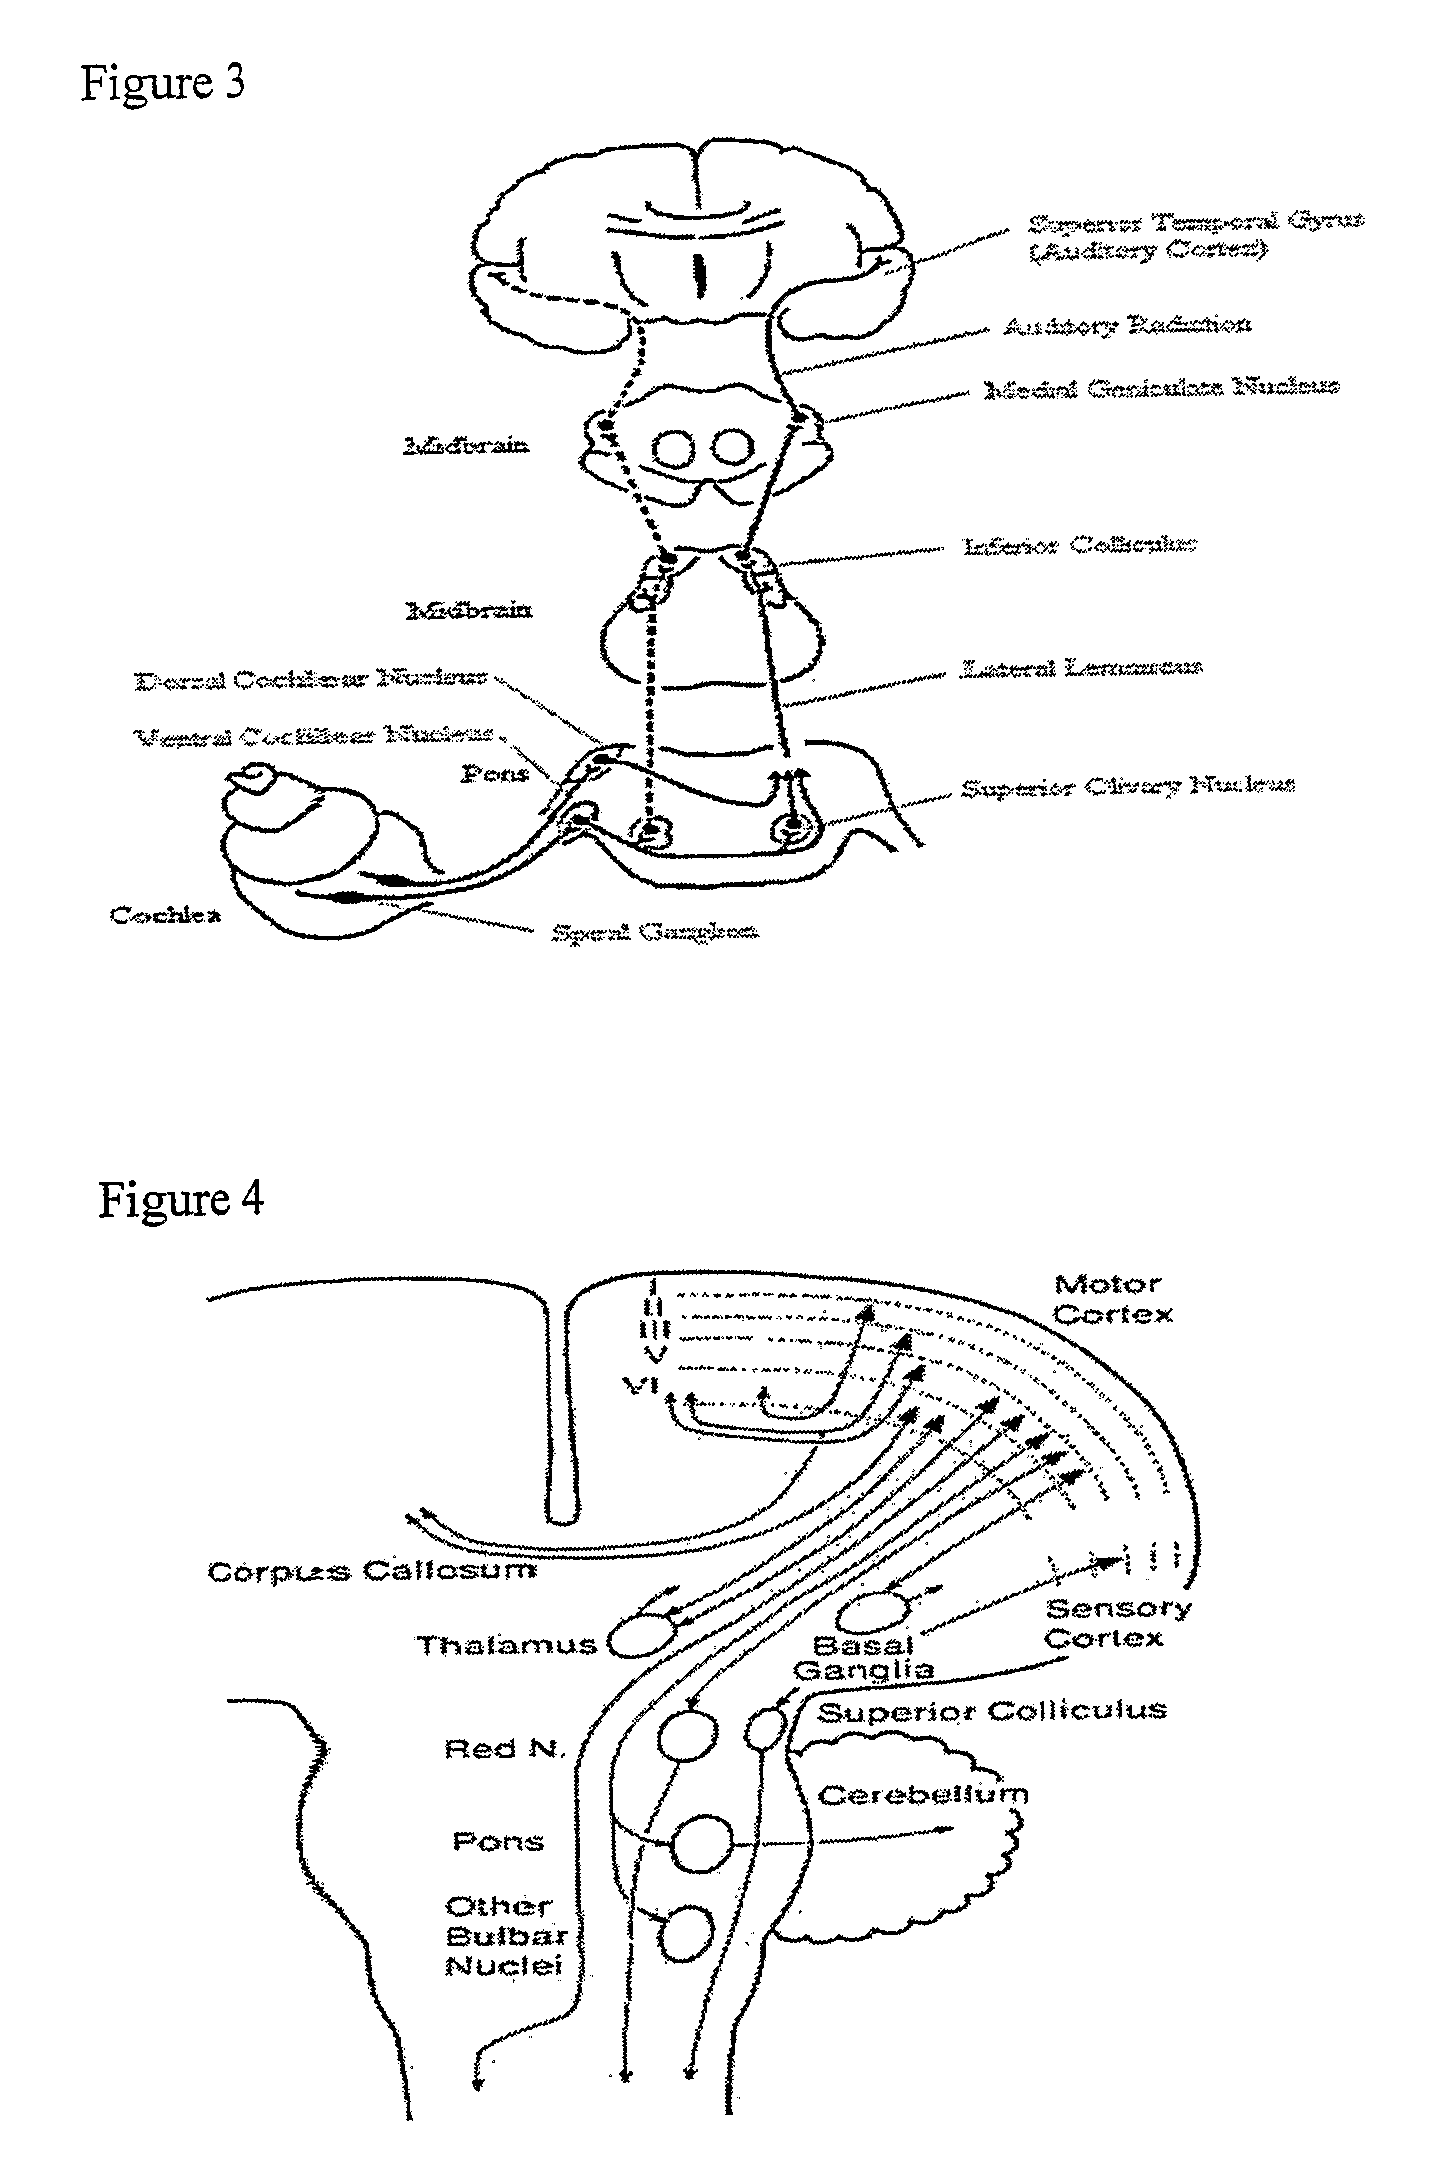 Method and Apparatus for Treatment of Tinnitus and Other Neurological Disorders by Brain Stimulation in the Inferior Colliculi and/or In Adjacent Areas